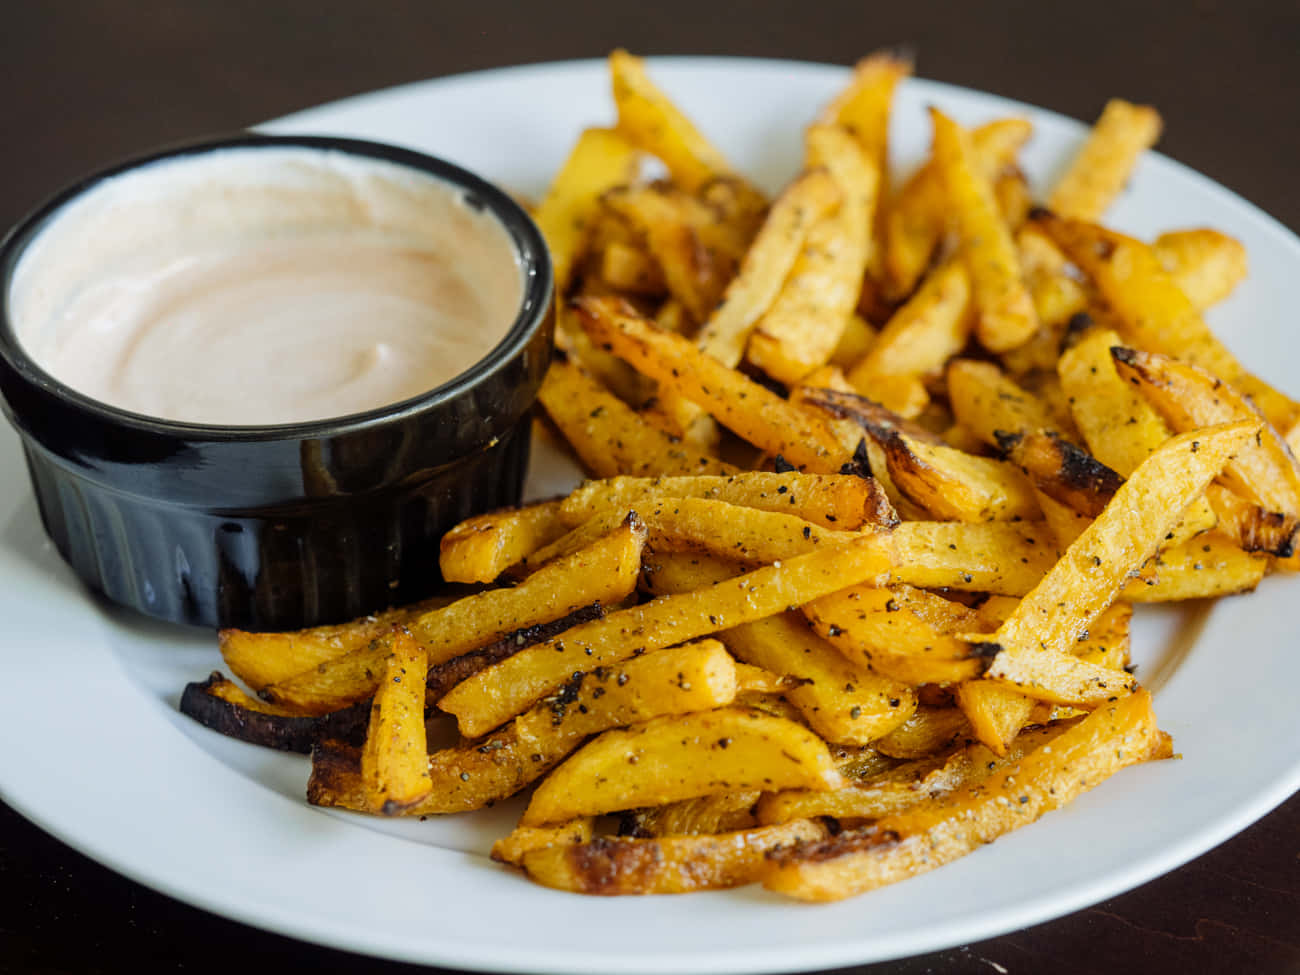 Enjoy a perfectly-cooked plate of golden French fries!